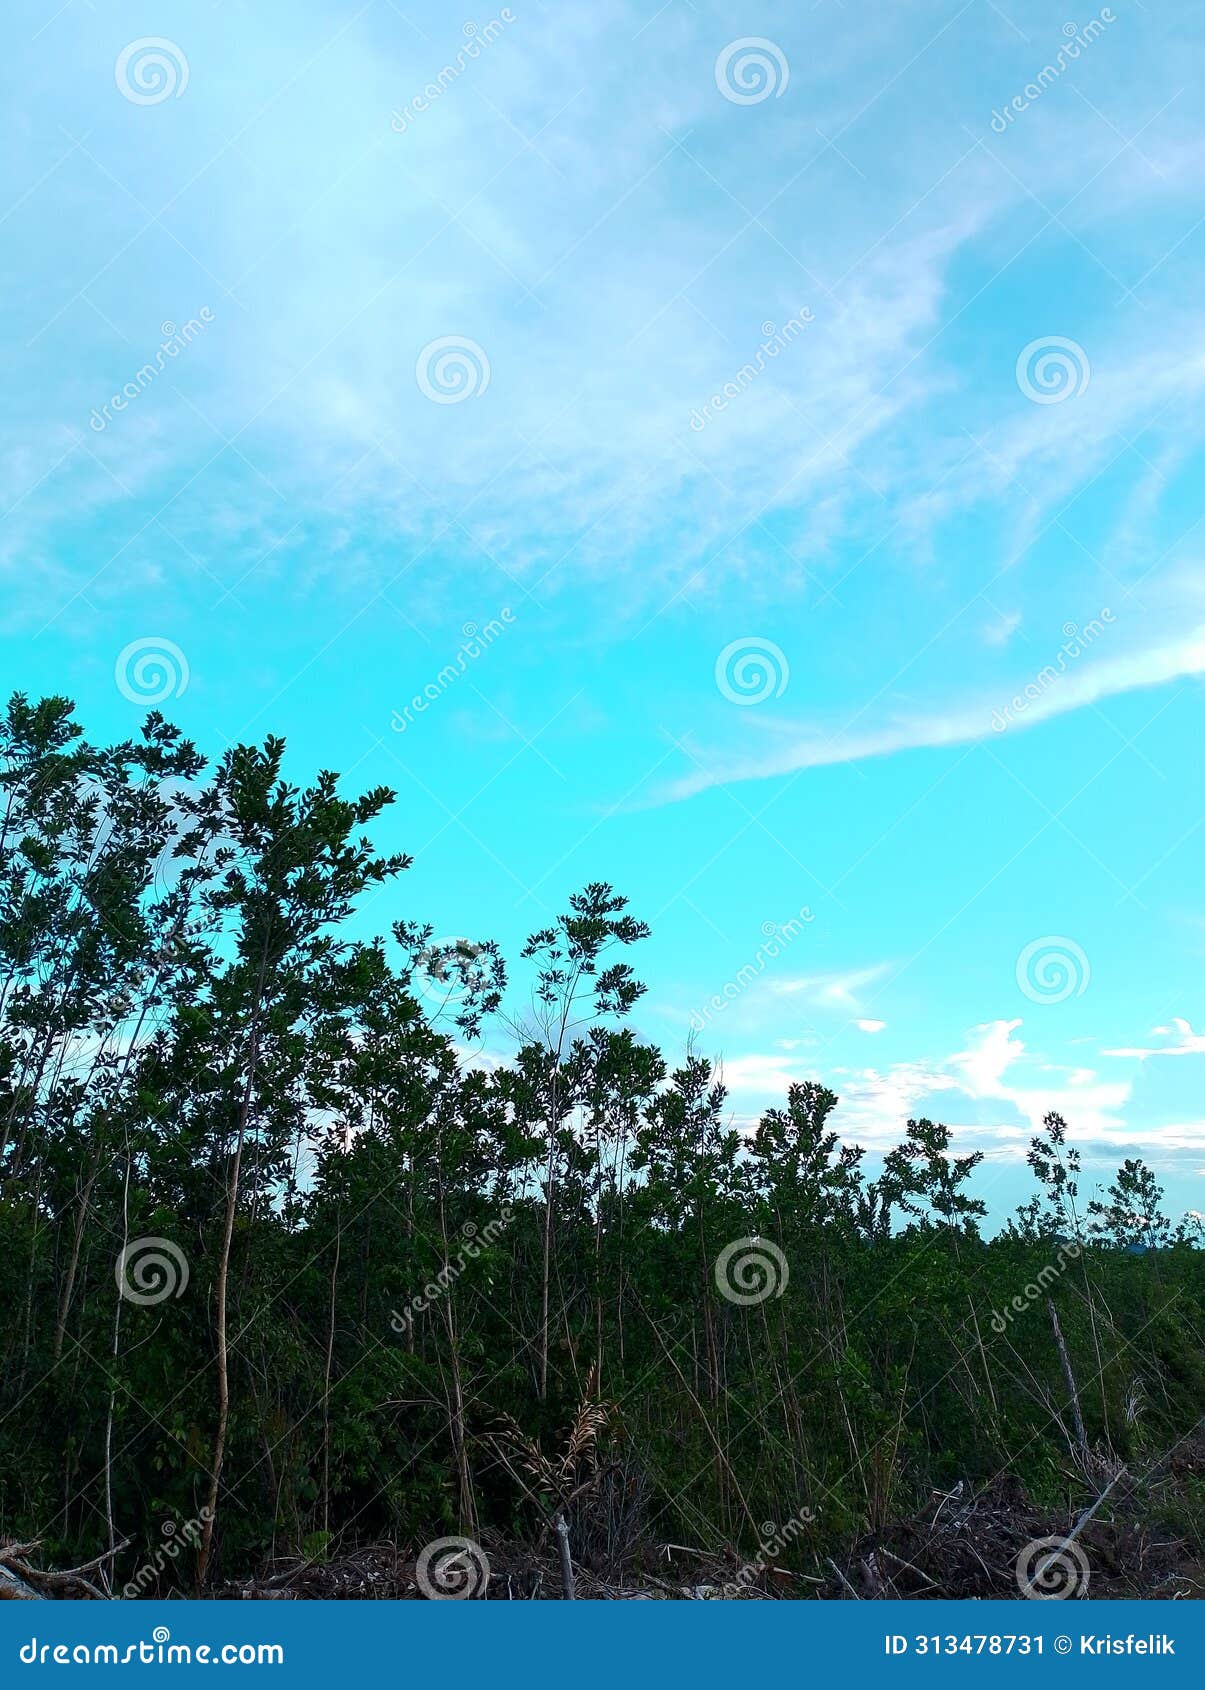 afternoon view of the land in the rubia area, sanggau district, west kalimantan